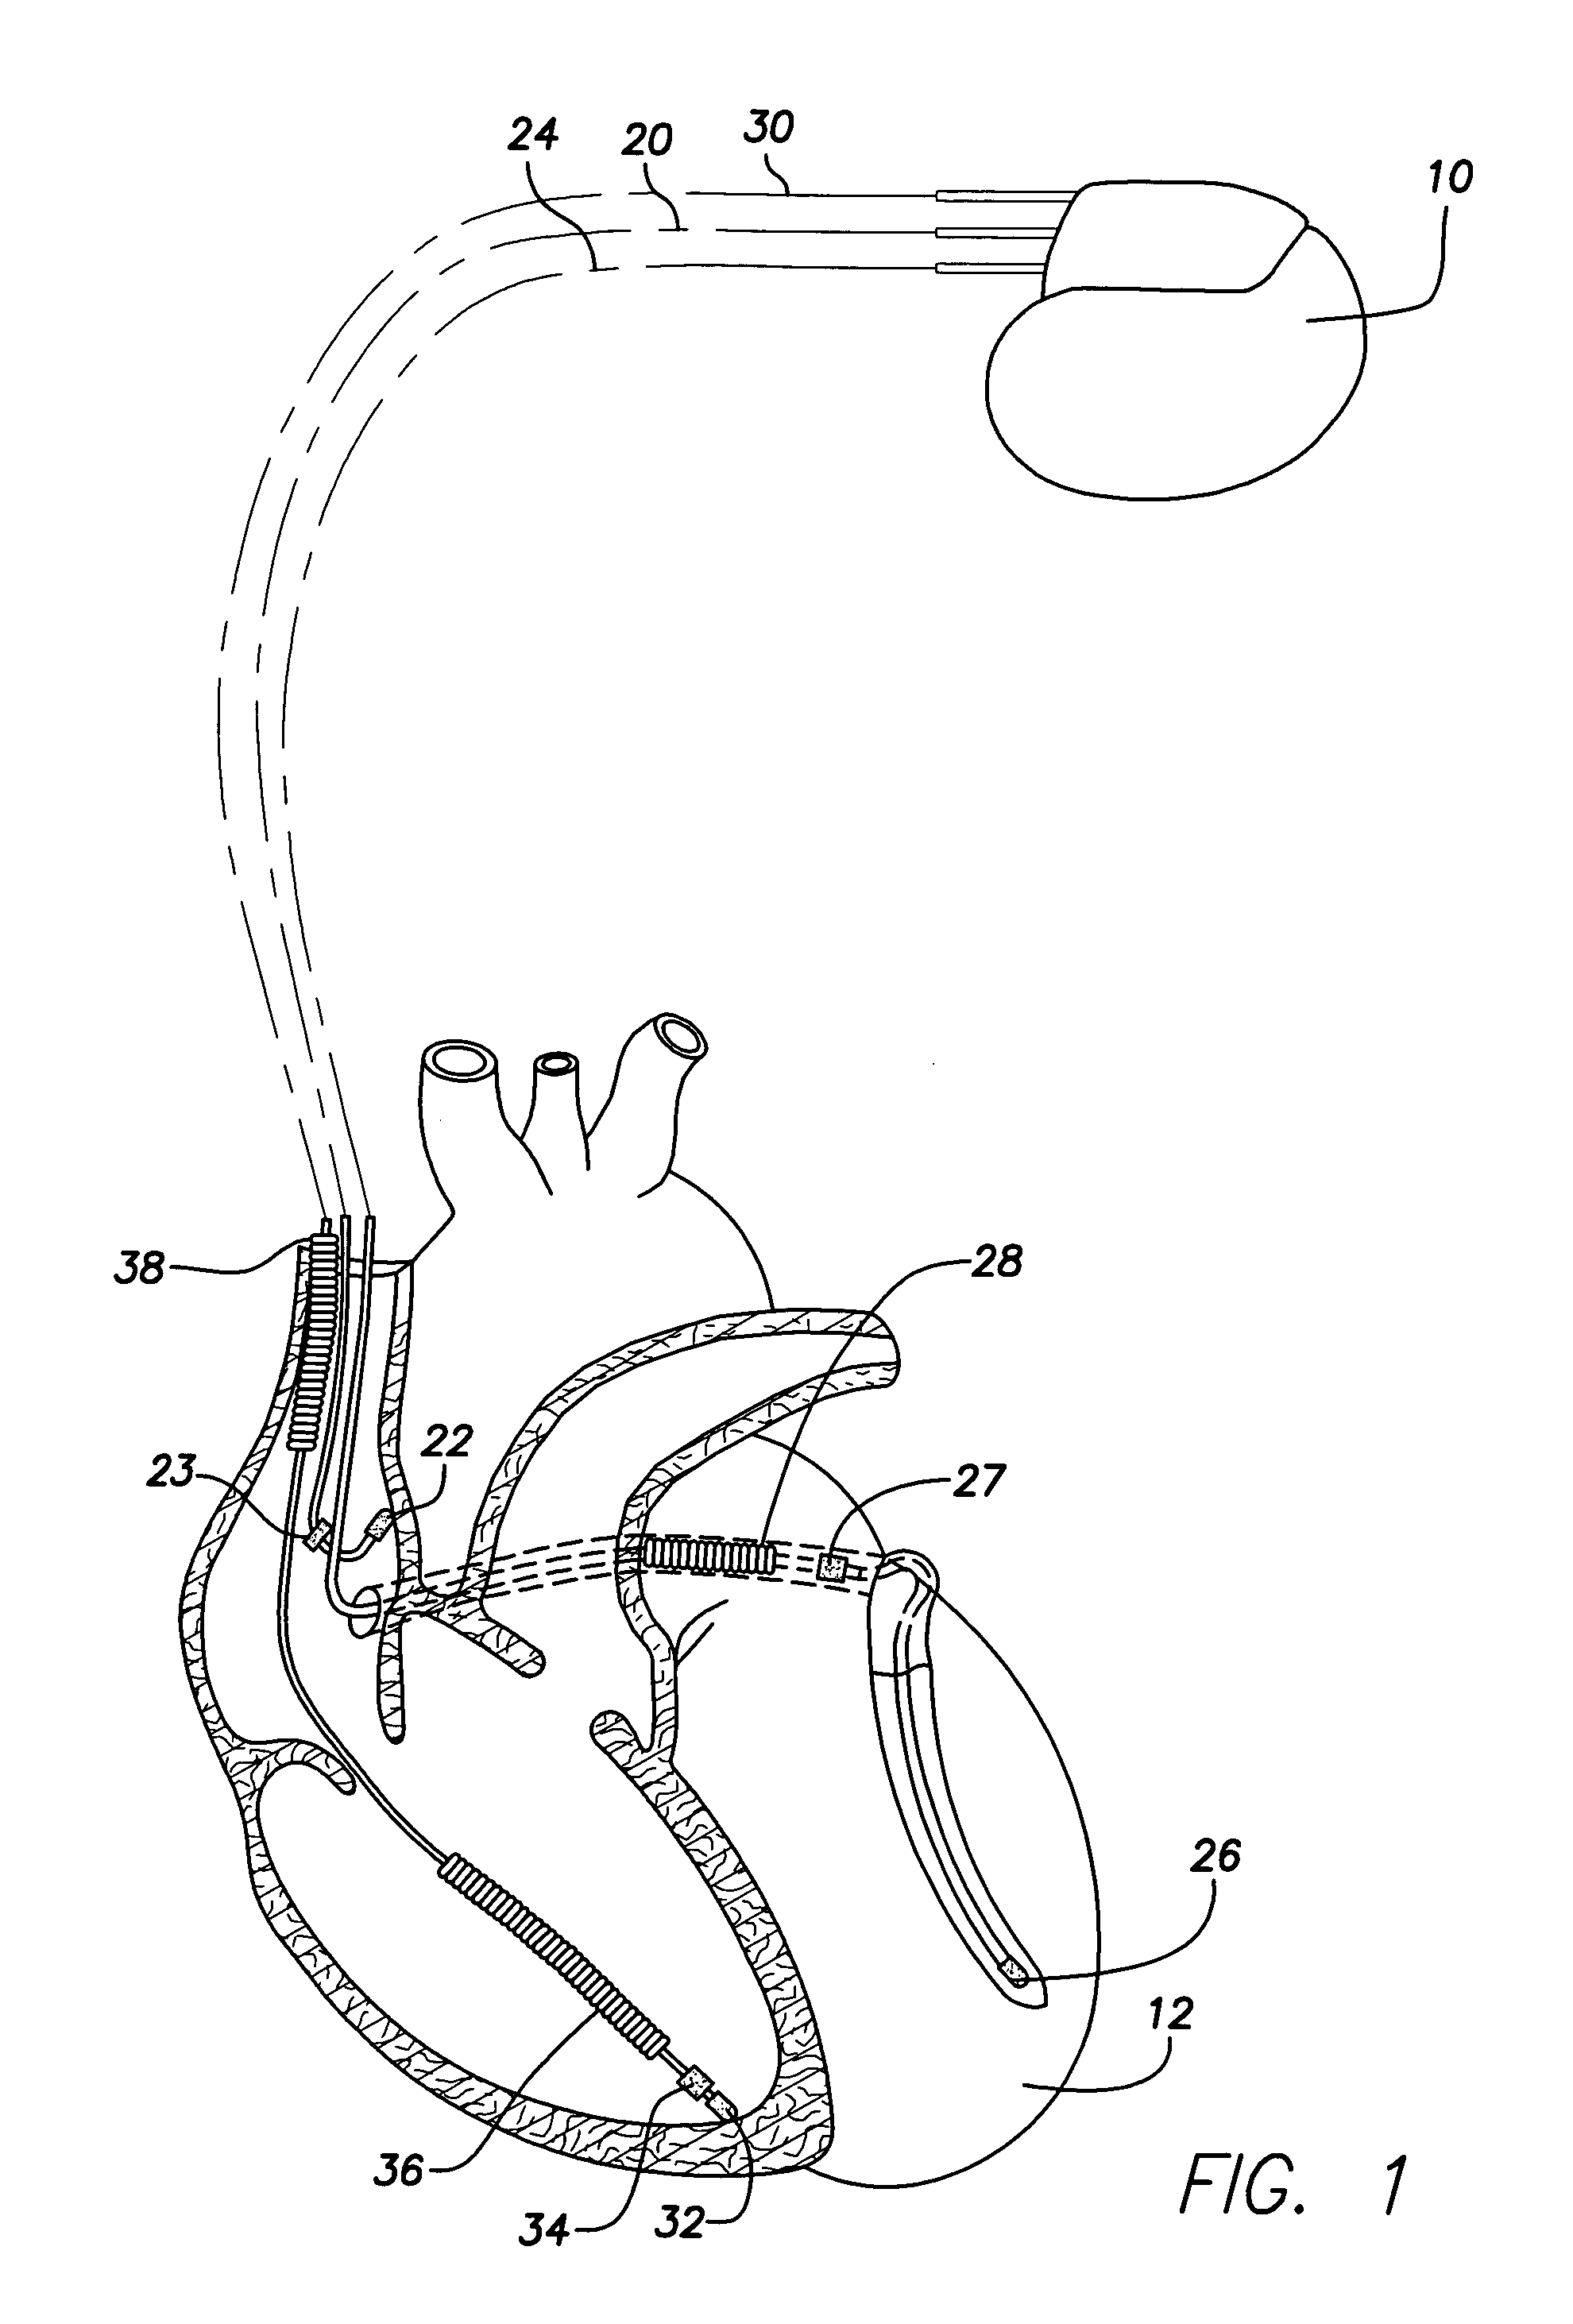 System and method for providing improved specificity for automatic mode switching within an implantable medical device